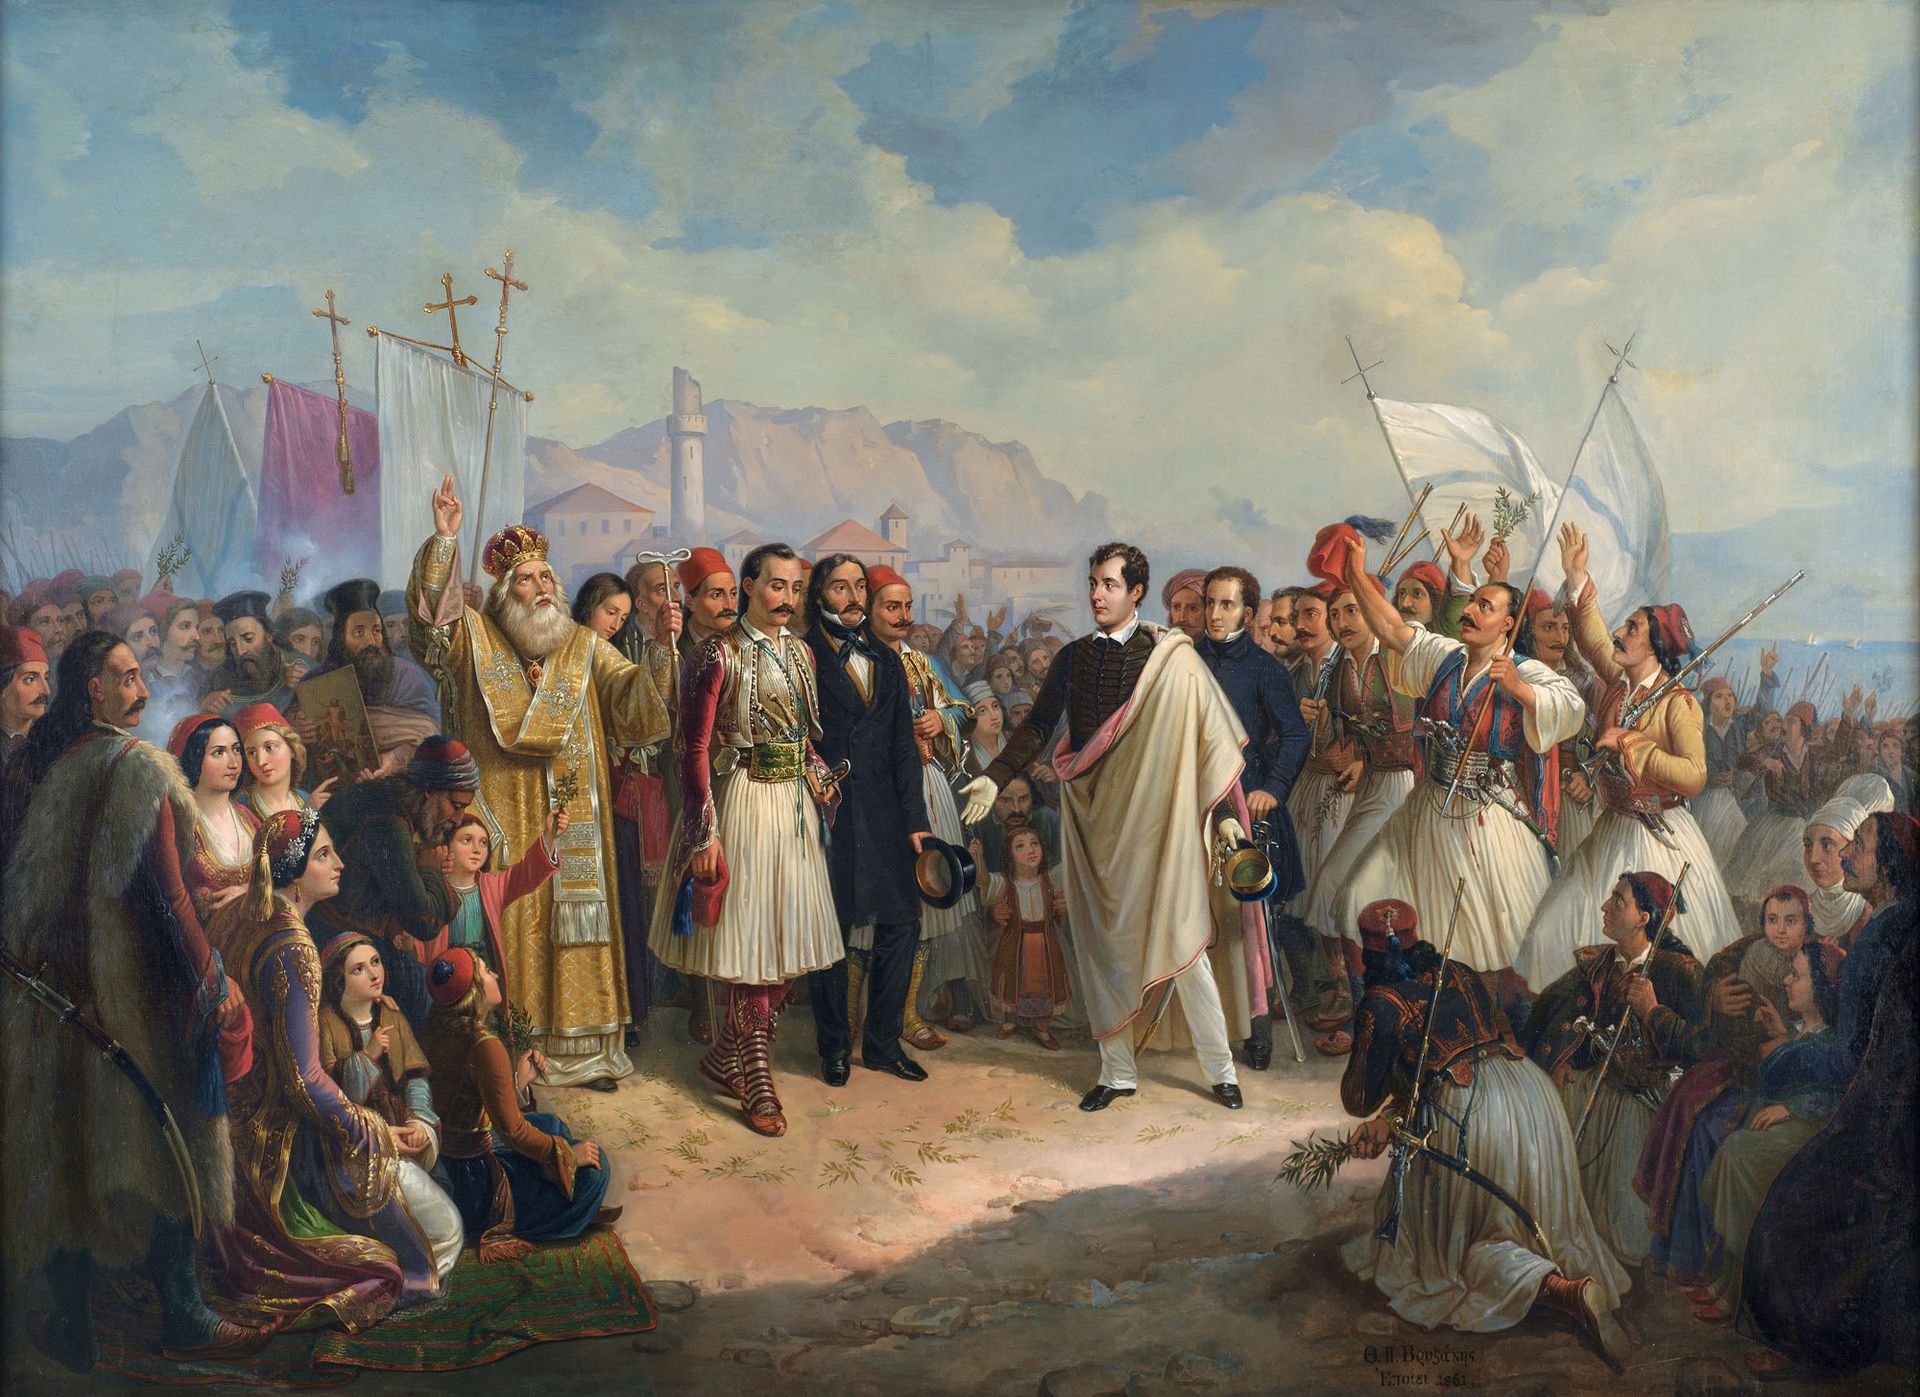 Theodoros Vryzakis's 1861 painting The Reception of Lord Byron at Missolonghi is included in an exhibition dedicated to the Greek War of Independence against the Ottoman Empire Courtesy of the Ministry of Culture and Sports